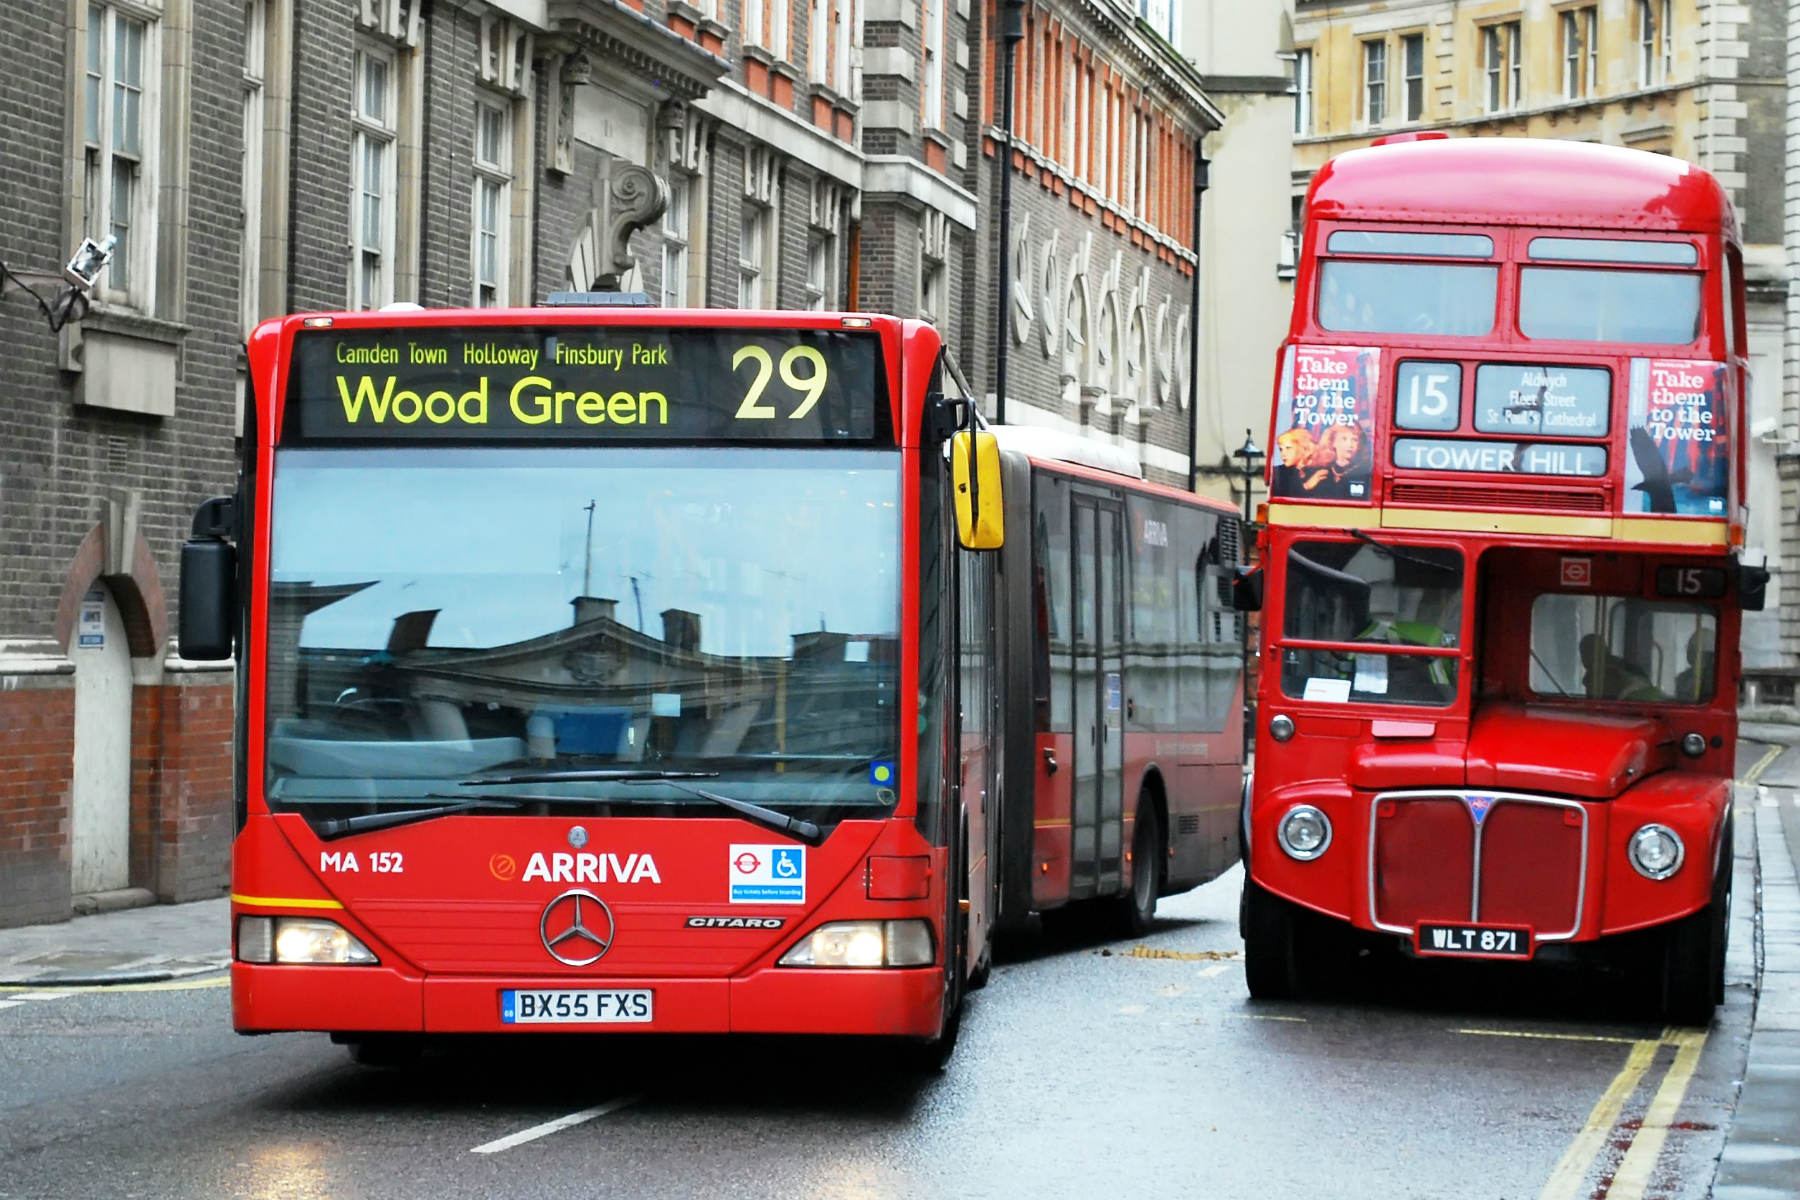 Bendy buses could be returning to London's roads